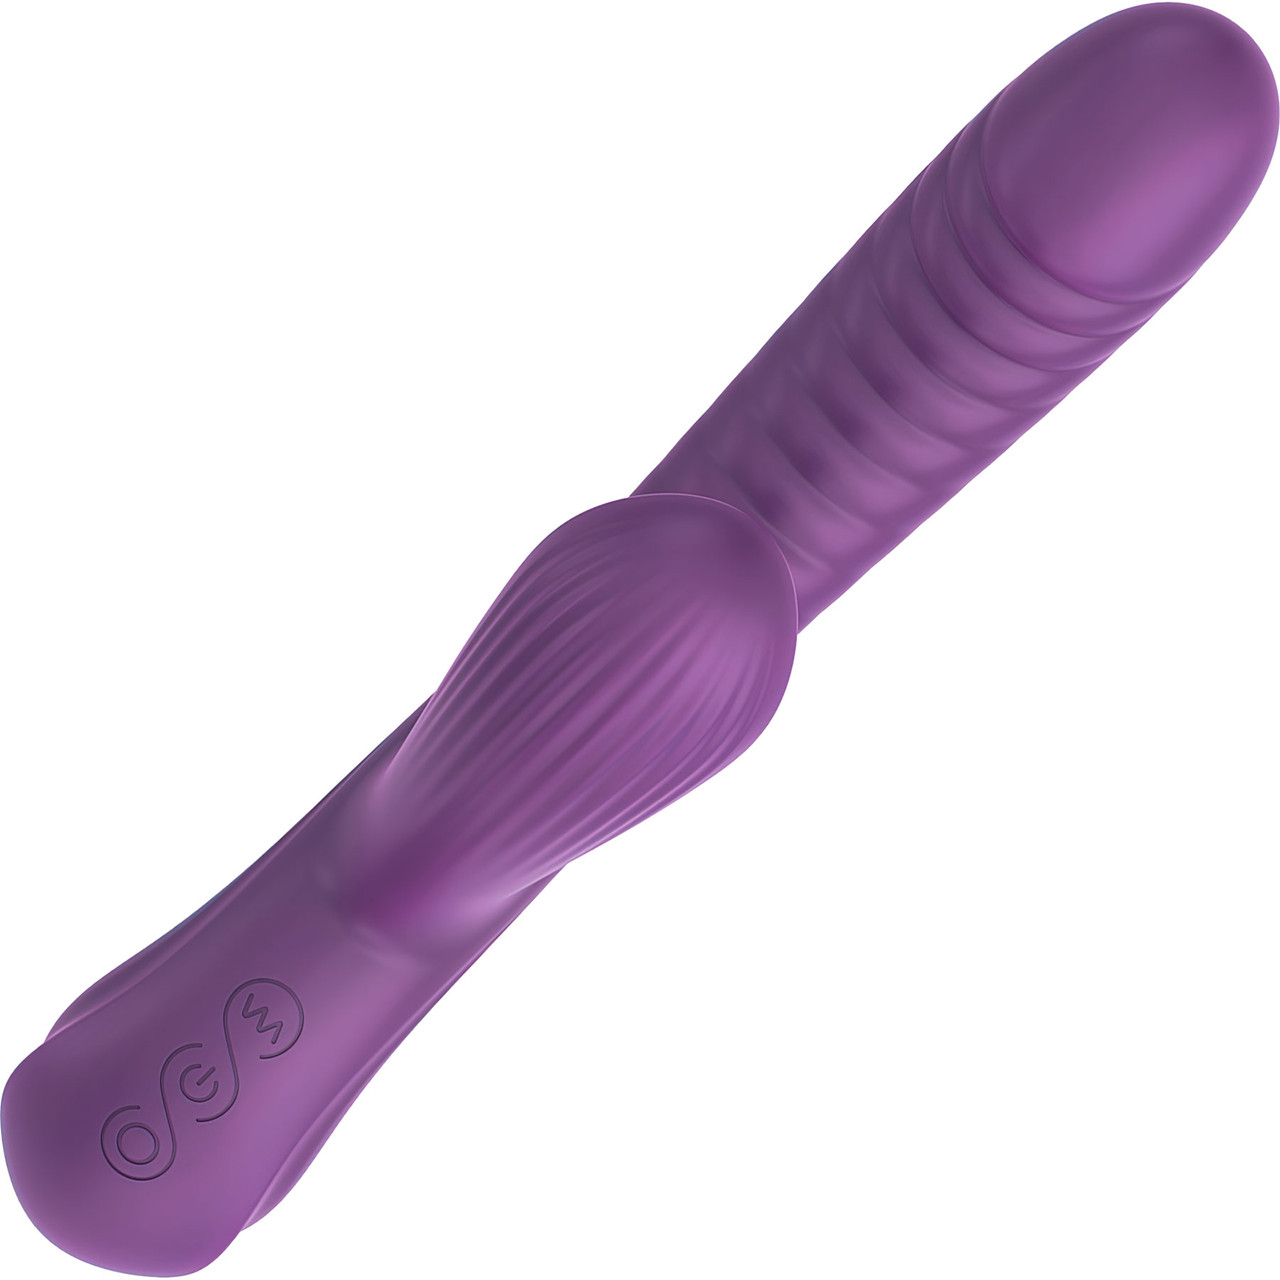 Tracys Dog Beta Rabbit 3-in-1 Sucking, Swinging, Vibrating Rechargeable Silicone Rabbit Vibrator picture